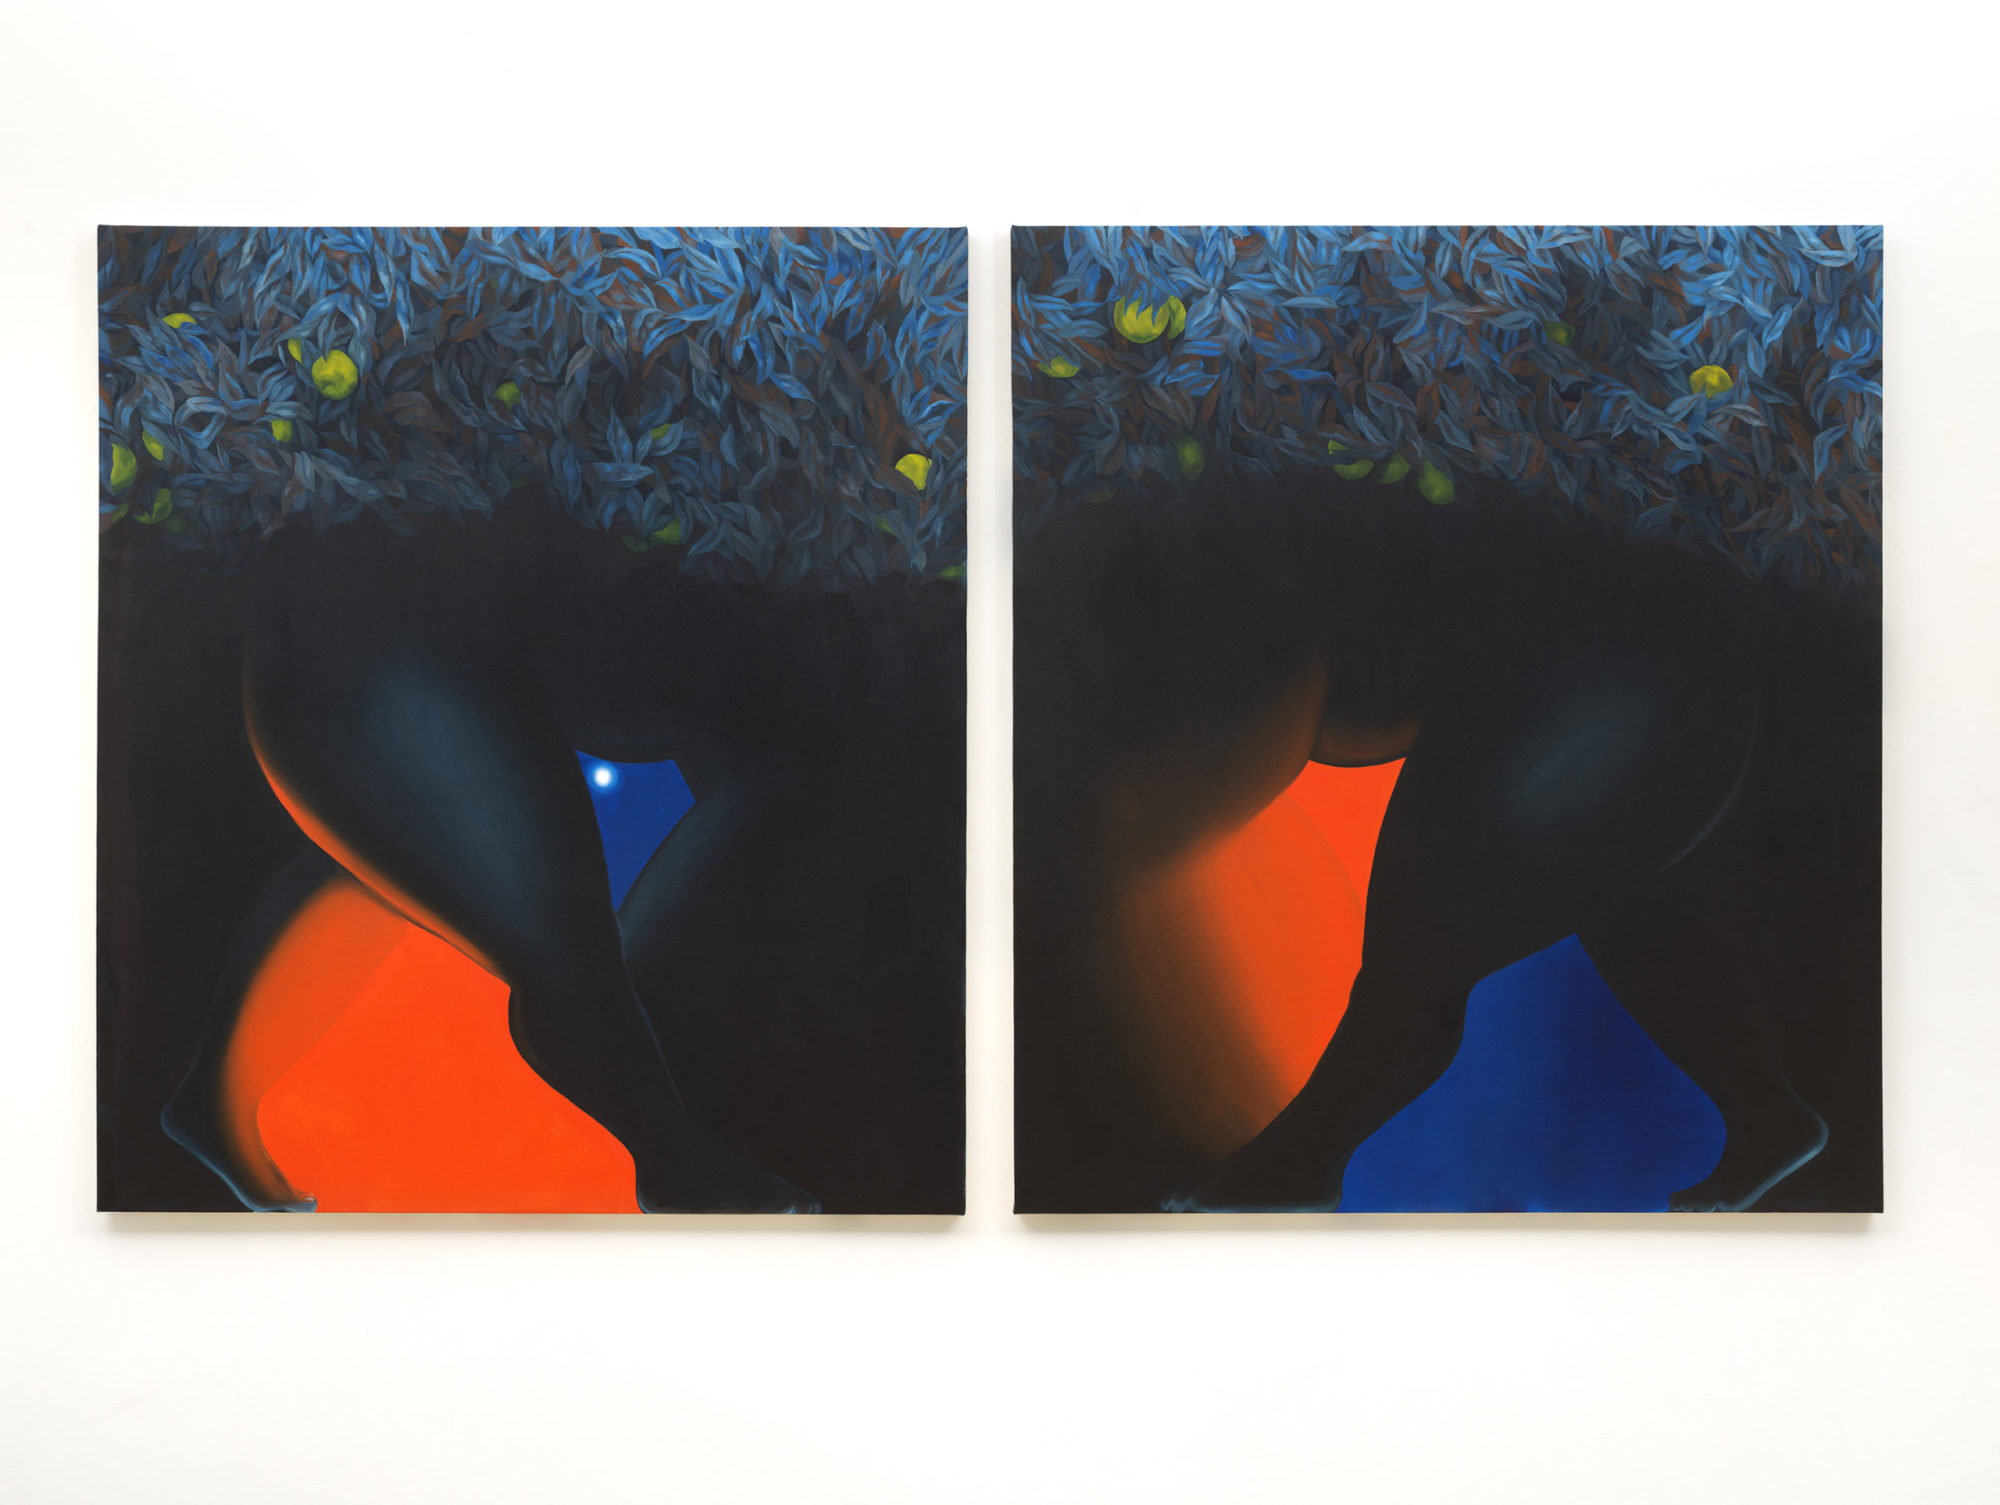 Diptych of bent figures, while they both appear to be mirror images since they face towards the left/ right, the left composition has more orange and the right is more blue. The top of the composition is shrouded by leaves. Oil on canvas